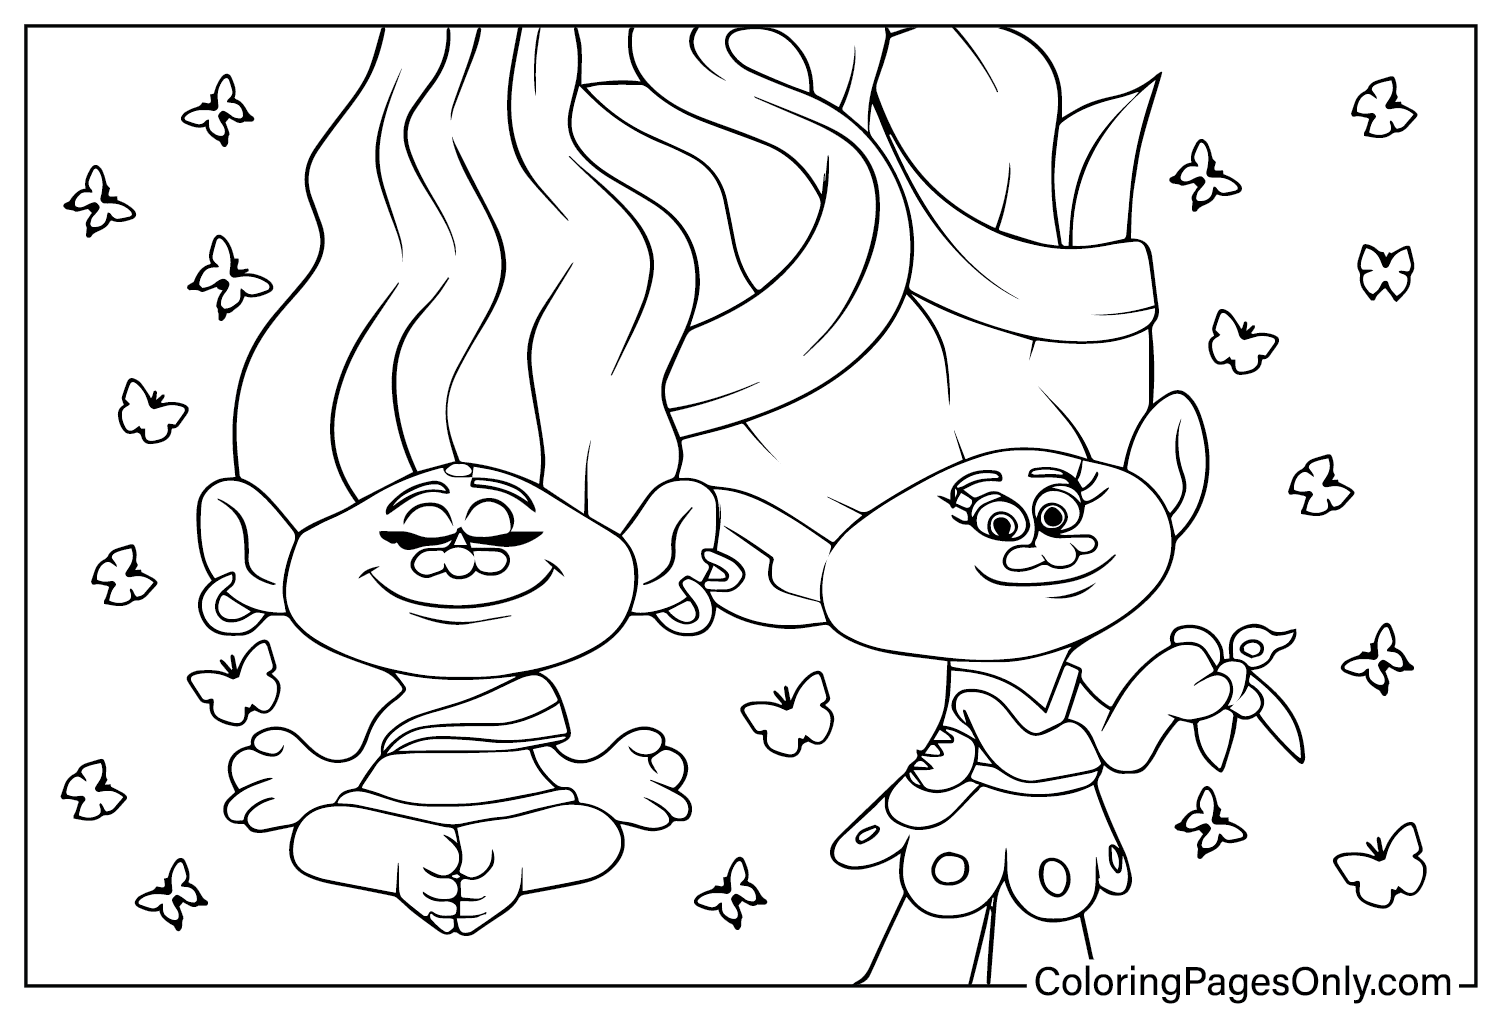 Trolls Band Together Coloring Pages Free Printable Coloring Pages